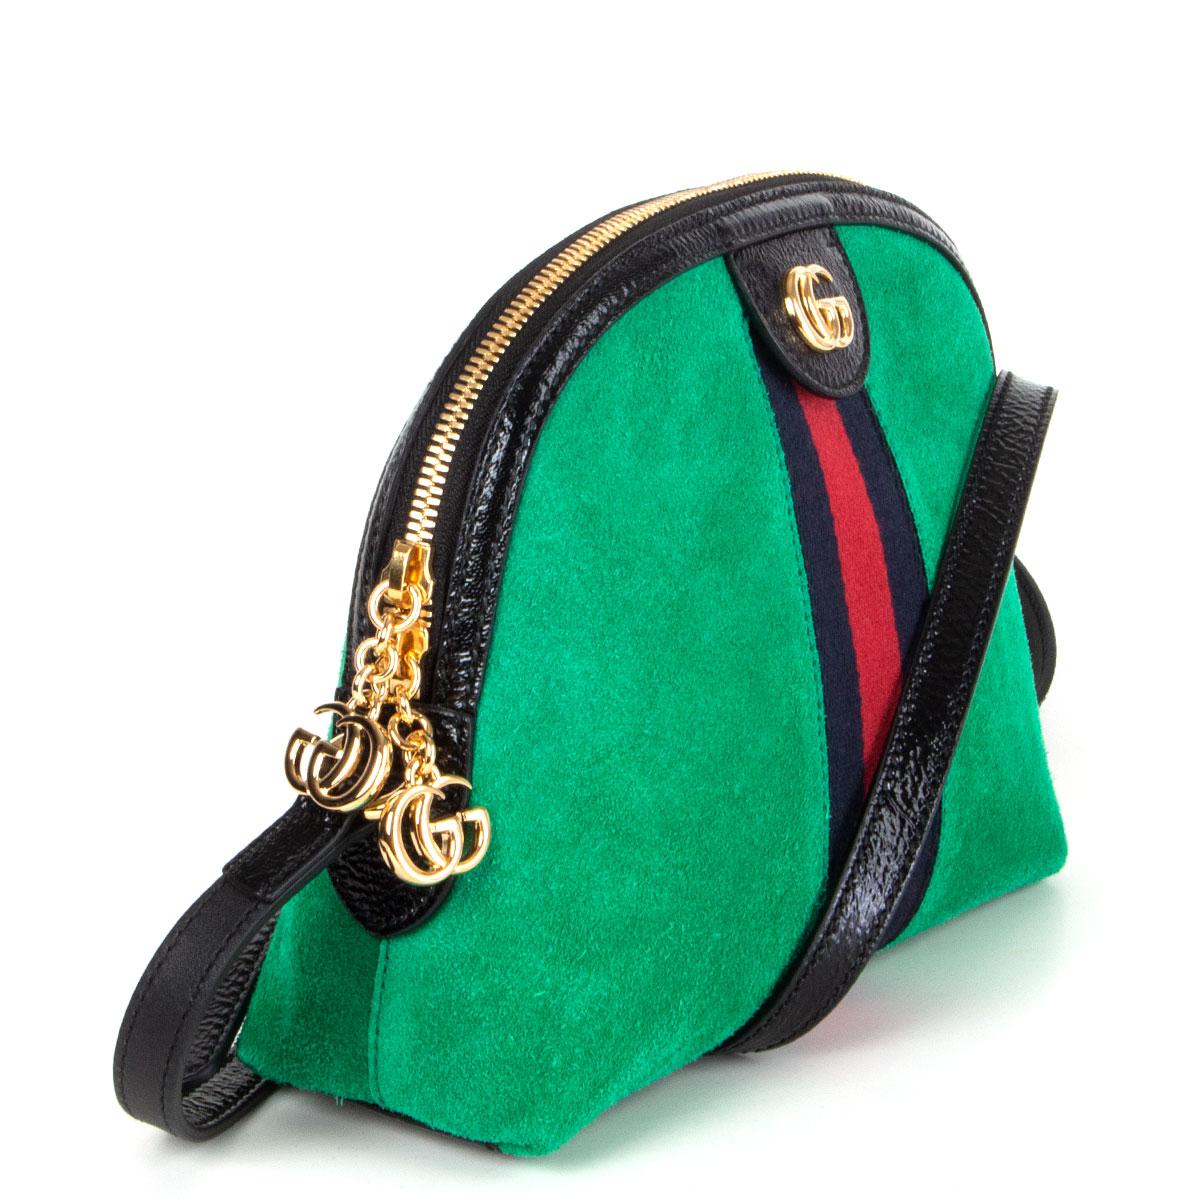 100% authentic Gucci 'Ophidia' shoulder bag in acid-green suede with blue-red web stripe and n black cracked leather trim. Gold-tone GG logo on the front. Closes with a two-way zipper on top. Lined in blue satin with an open pocket against the back.